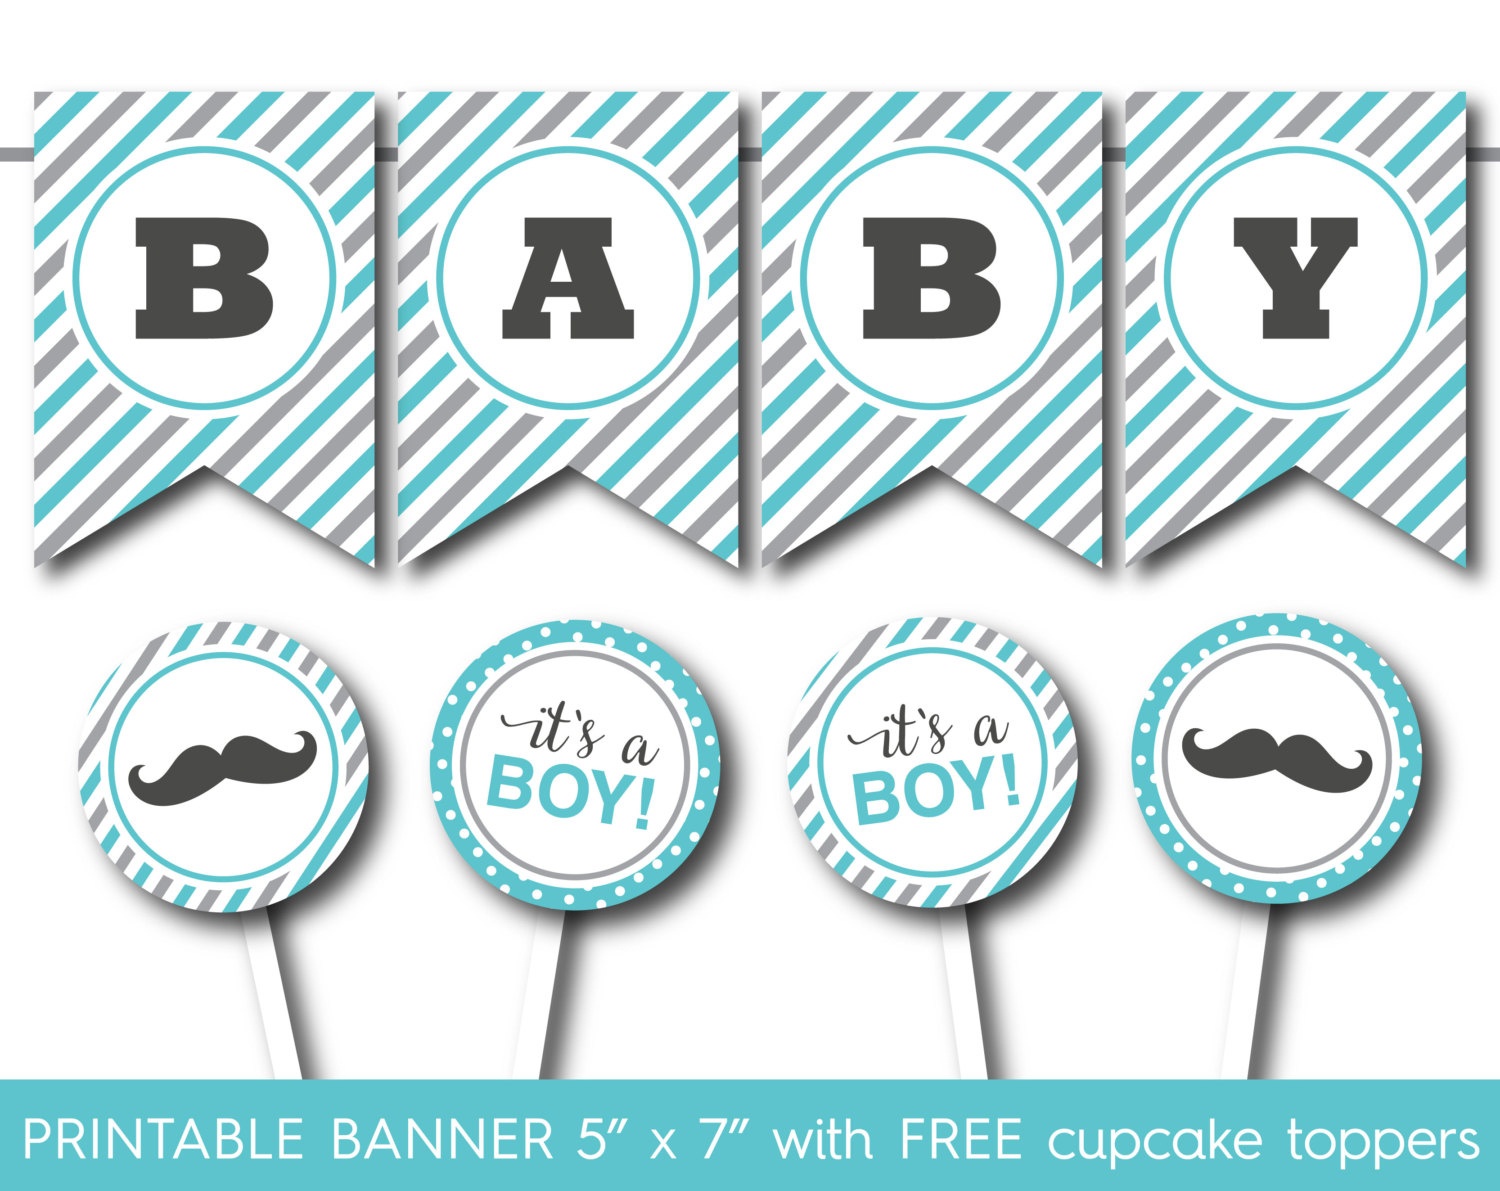 44 Cool Banner Letters | Kittybabylove - Free Printable Baby Shower Banner Letters